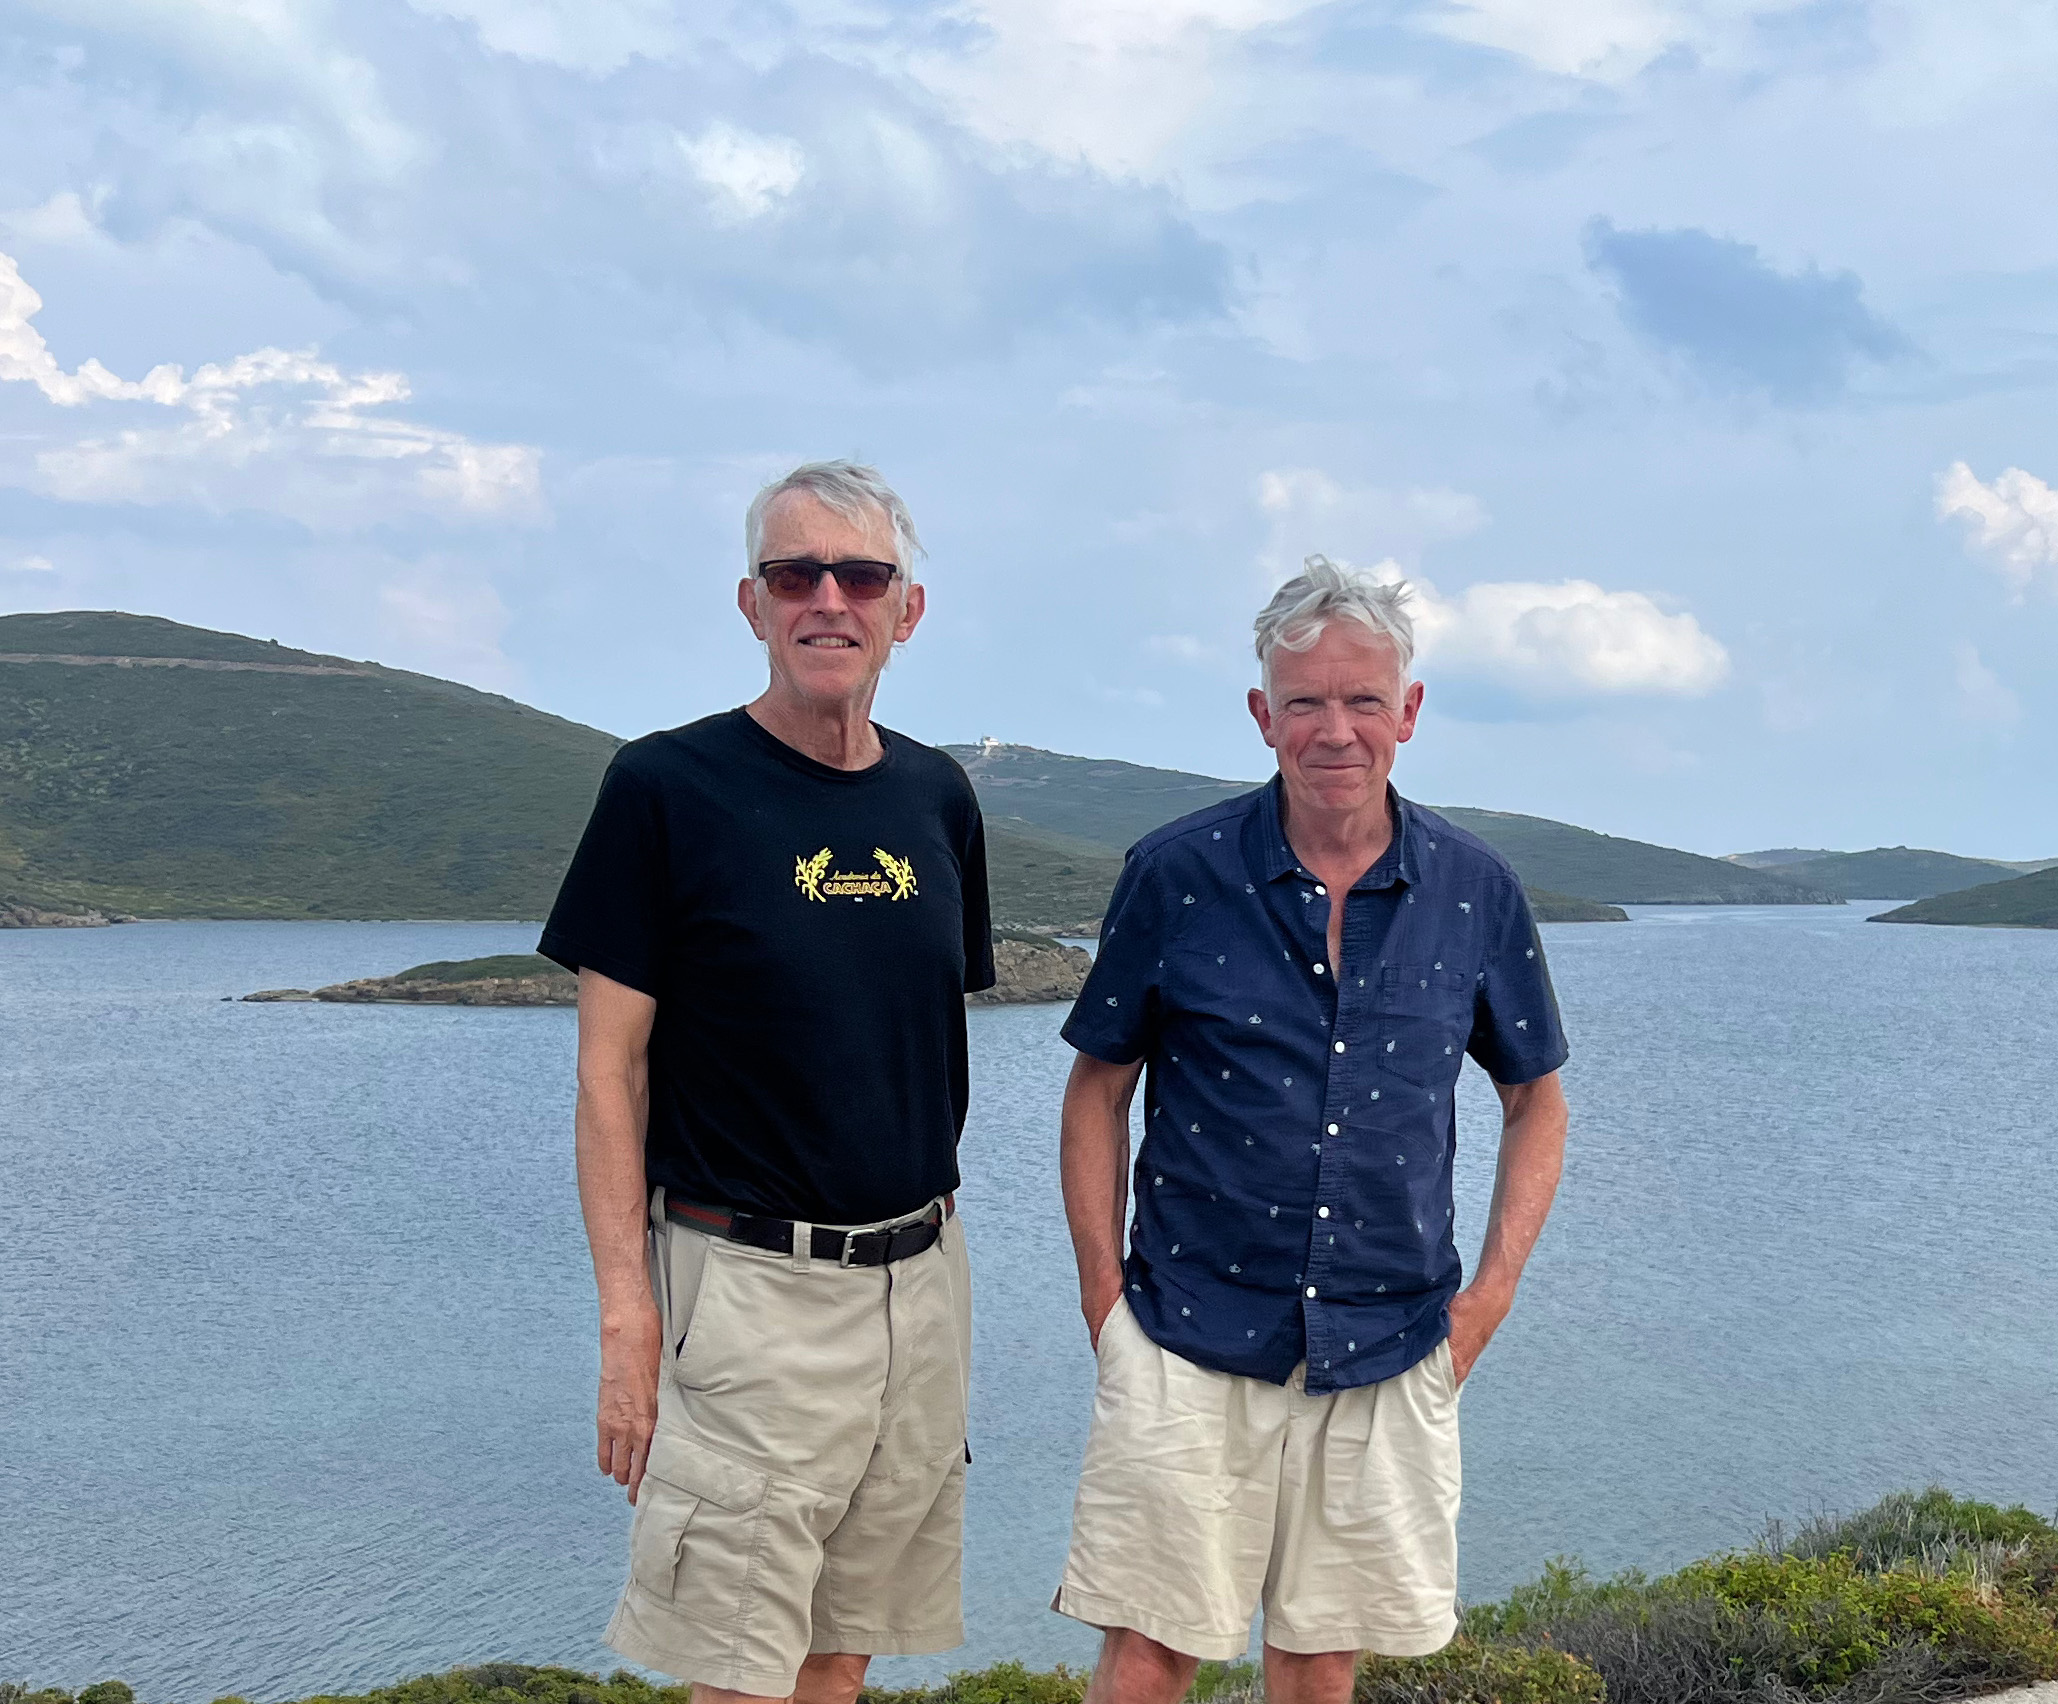 Jeremy Gardiner and Richard Colson on Oinusses, Greece